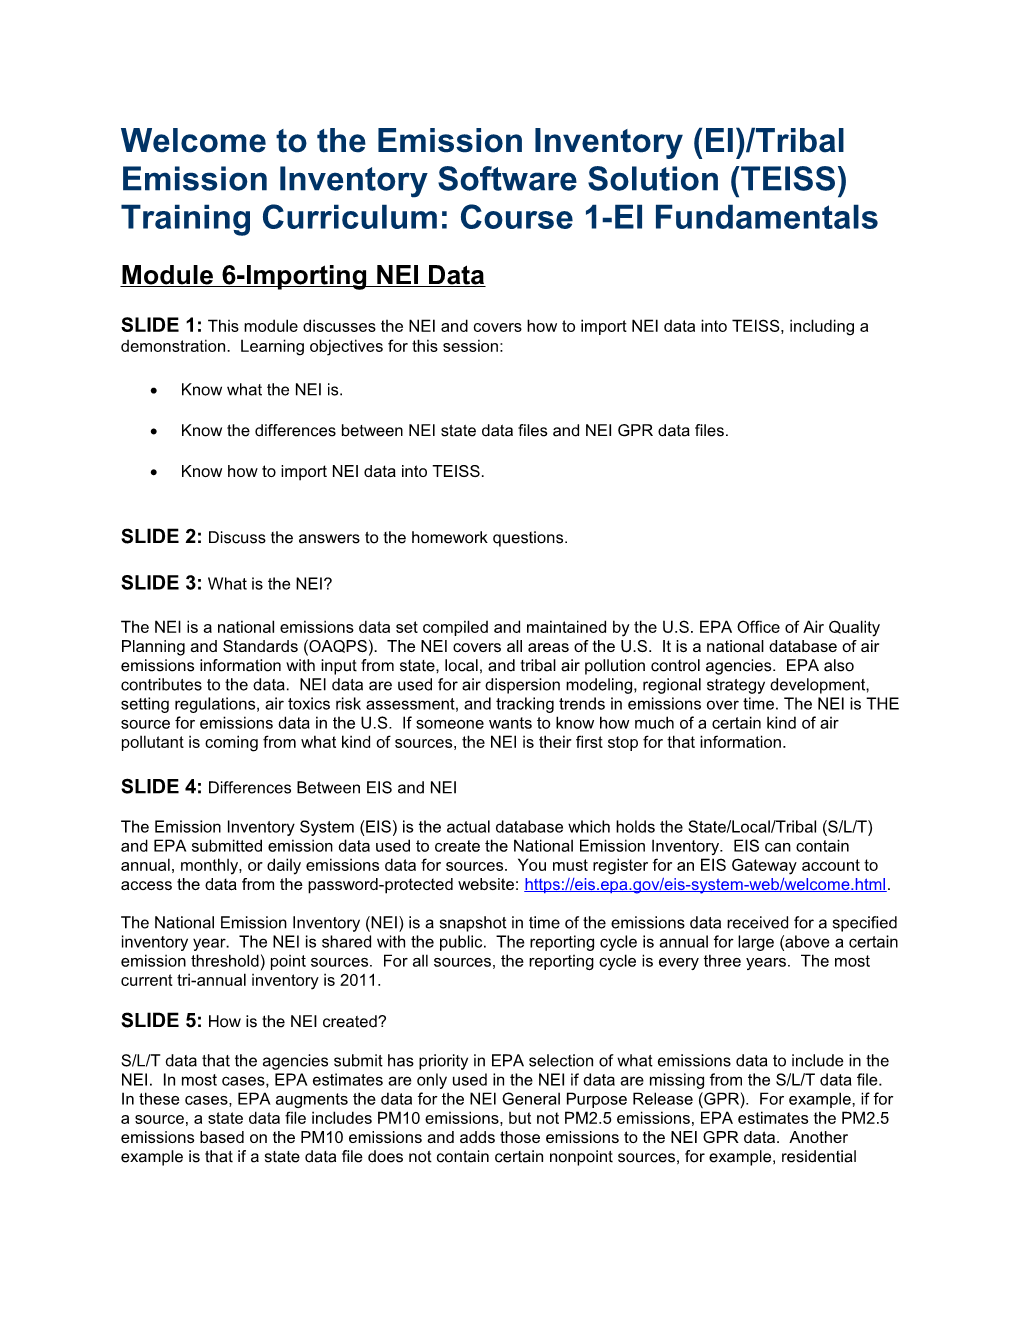 Welcome to the Emission Inventory (EI)/Tribal Emission Inventory Software Solution (TEISS) s1